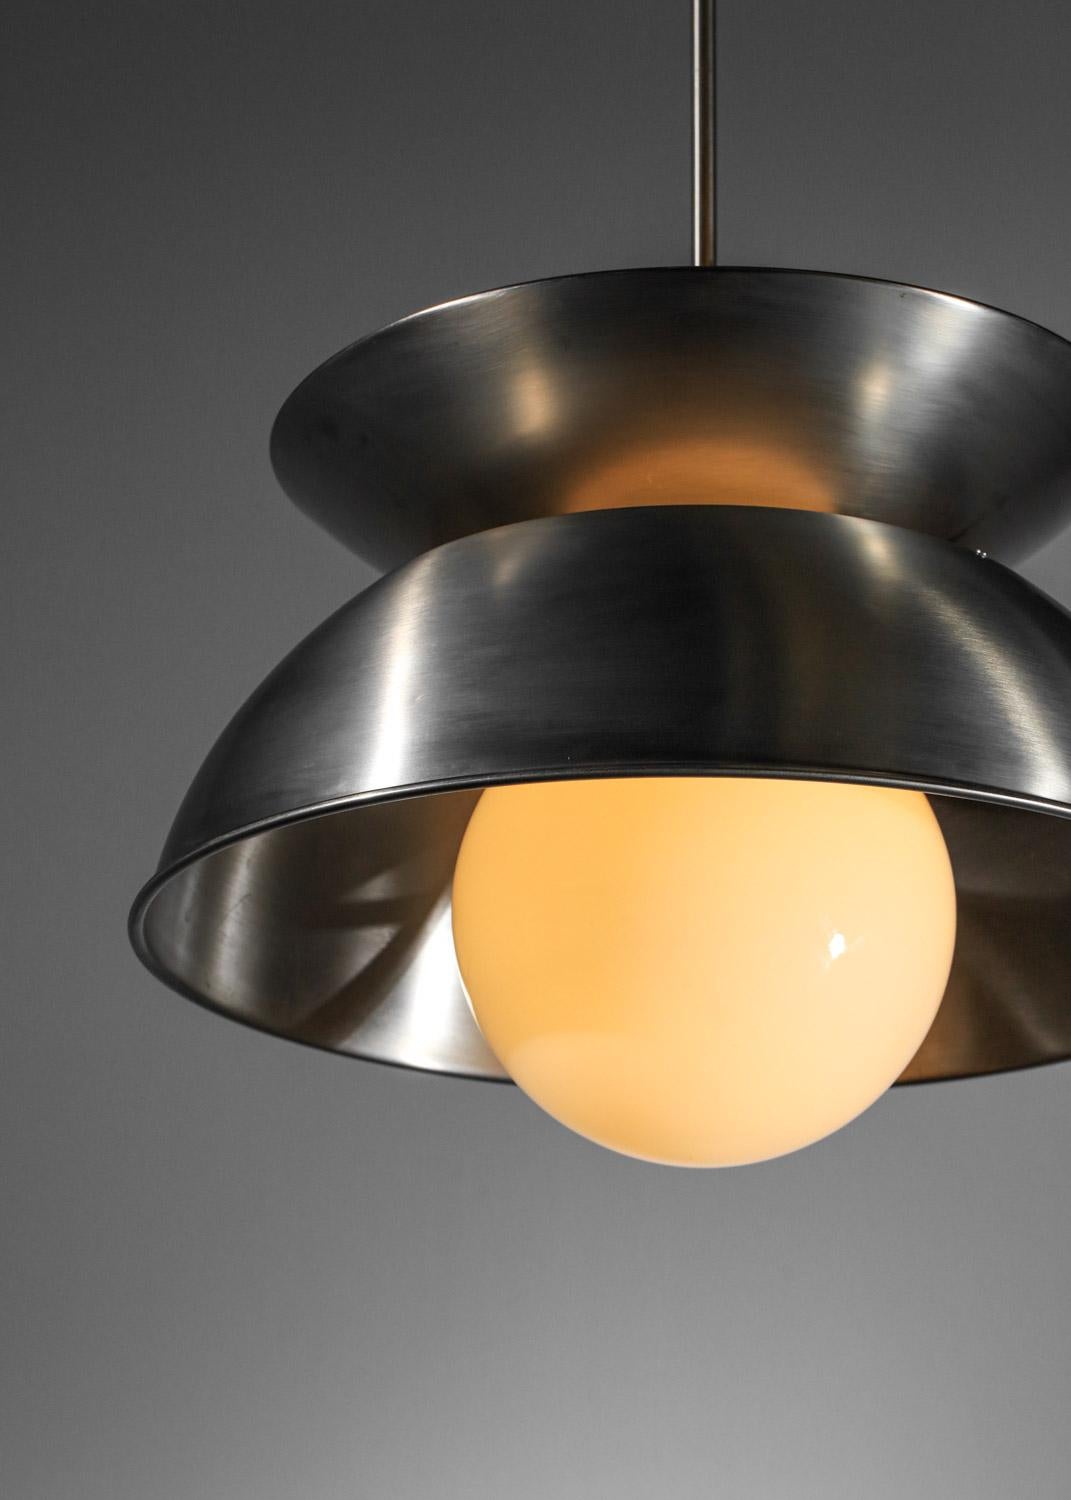 Artemide in the 1970s. This pendant light is made up of two brushed metal lampshades with double lighting (inside each of the lampshades). Very beautiful vintage condition, note scratches and traces of oxidation on the luster. We recommend four E27